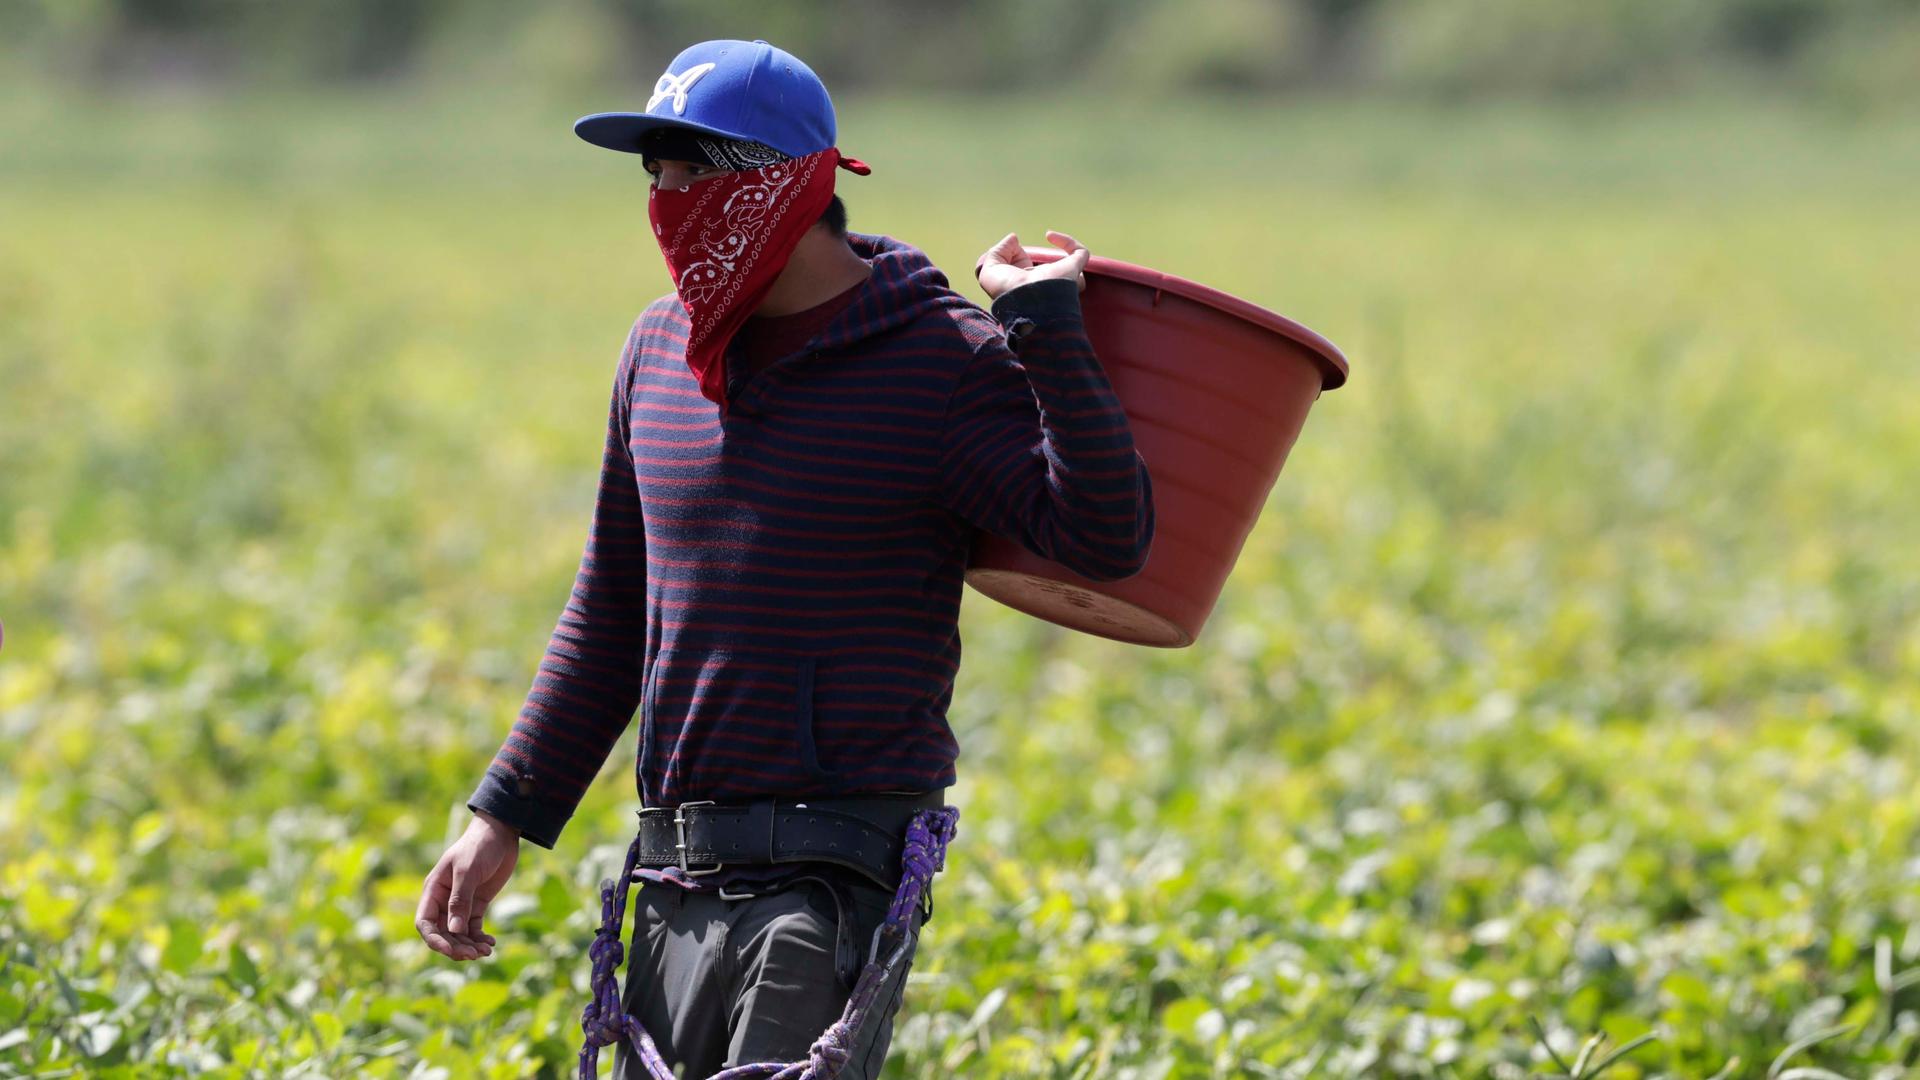 A farmworker, considered an essential worker under the current COVID-19 pandemic, harvests beans, May 12, 2020, in Homestead, Florida.